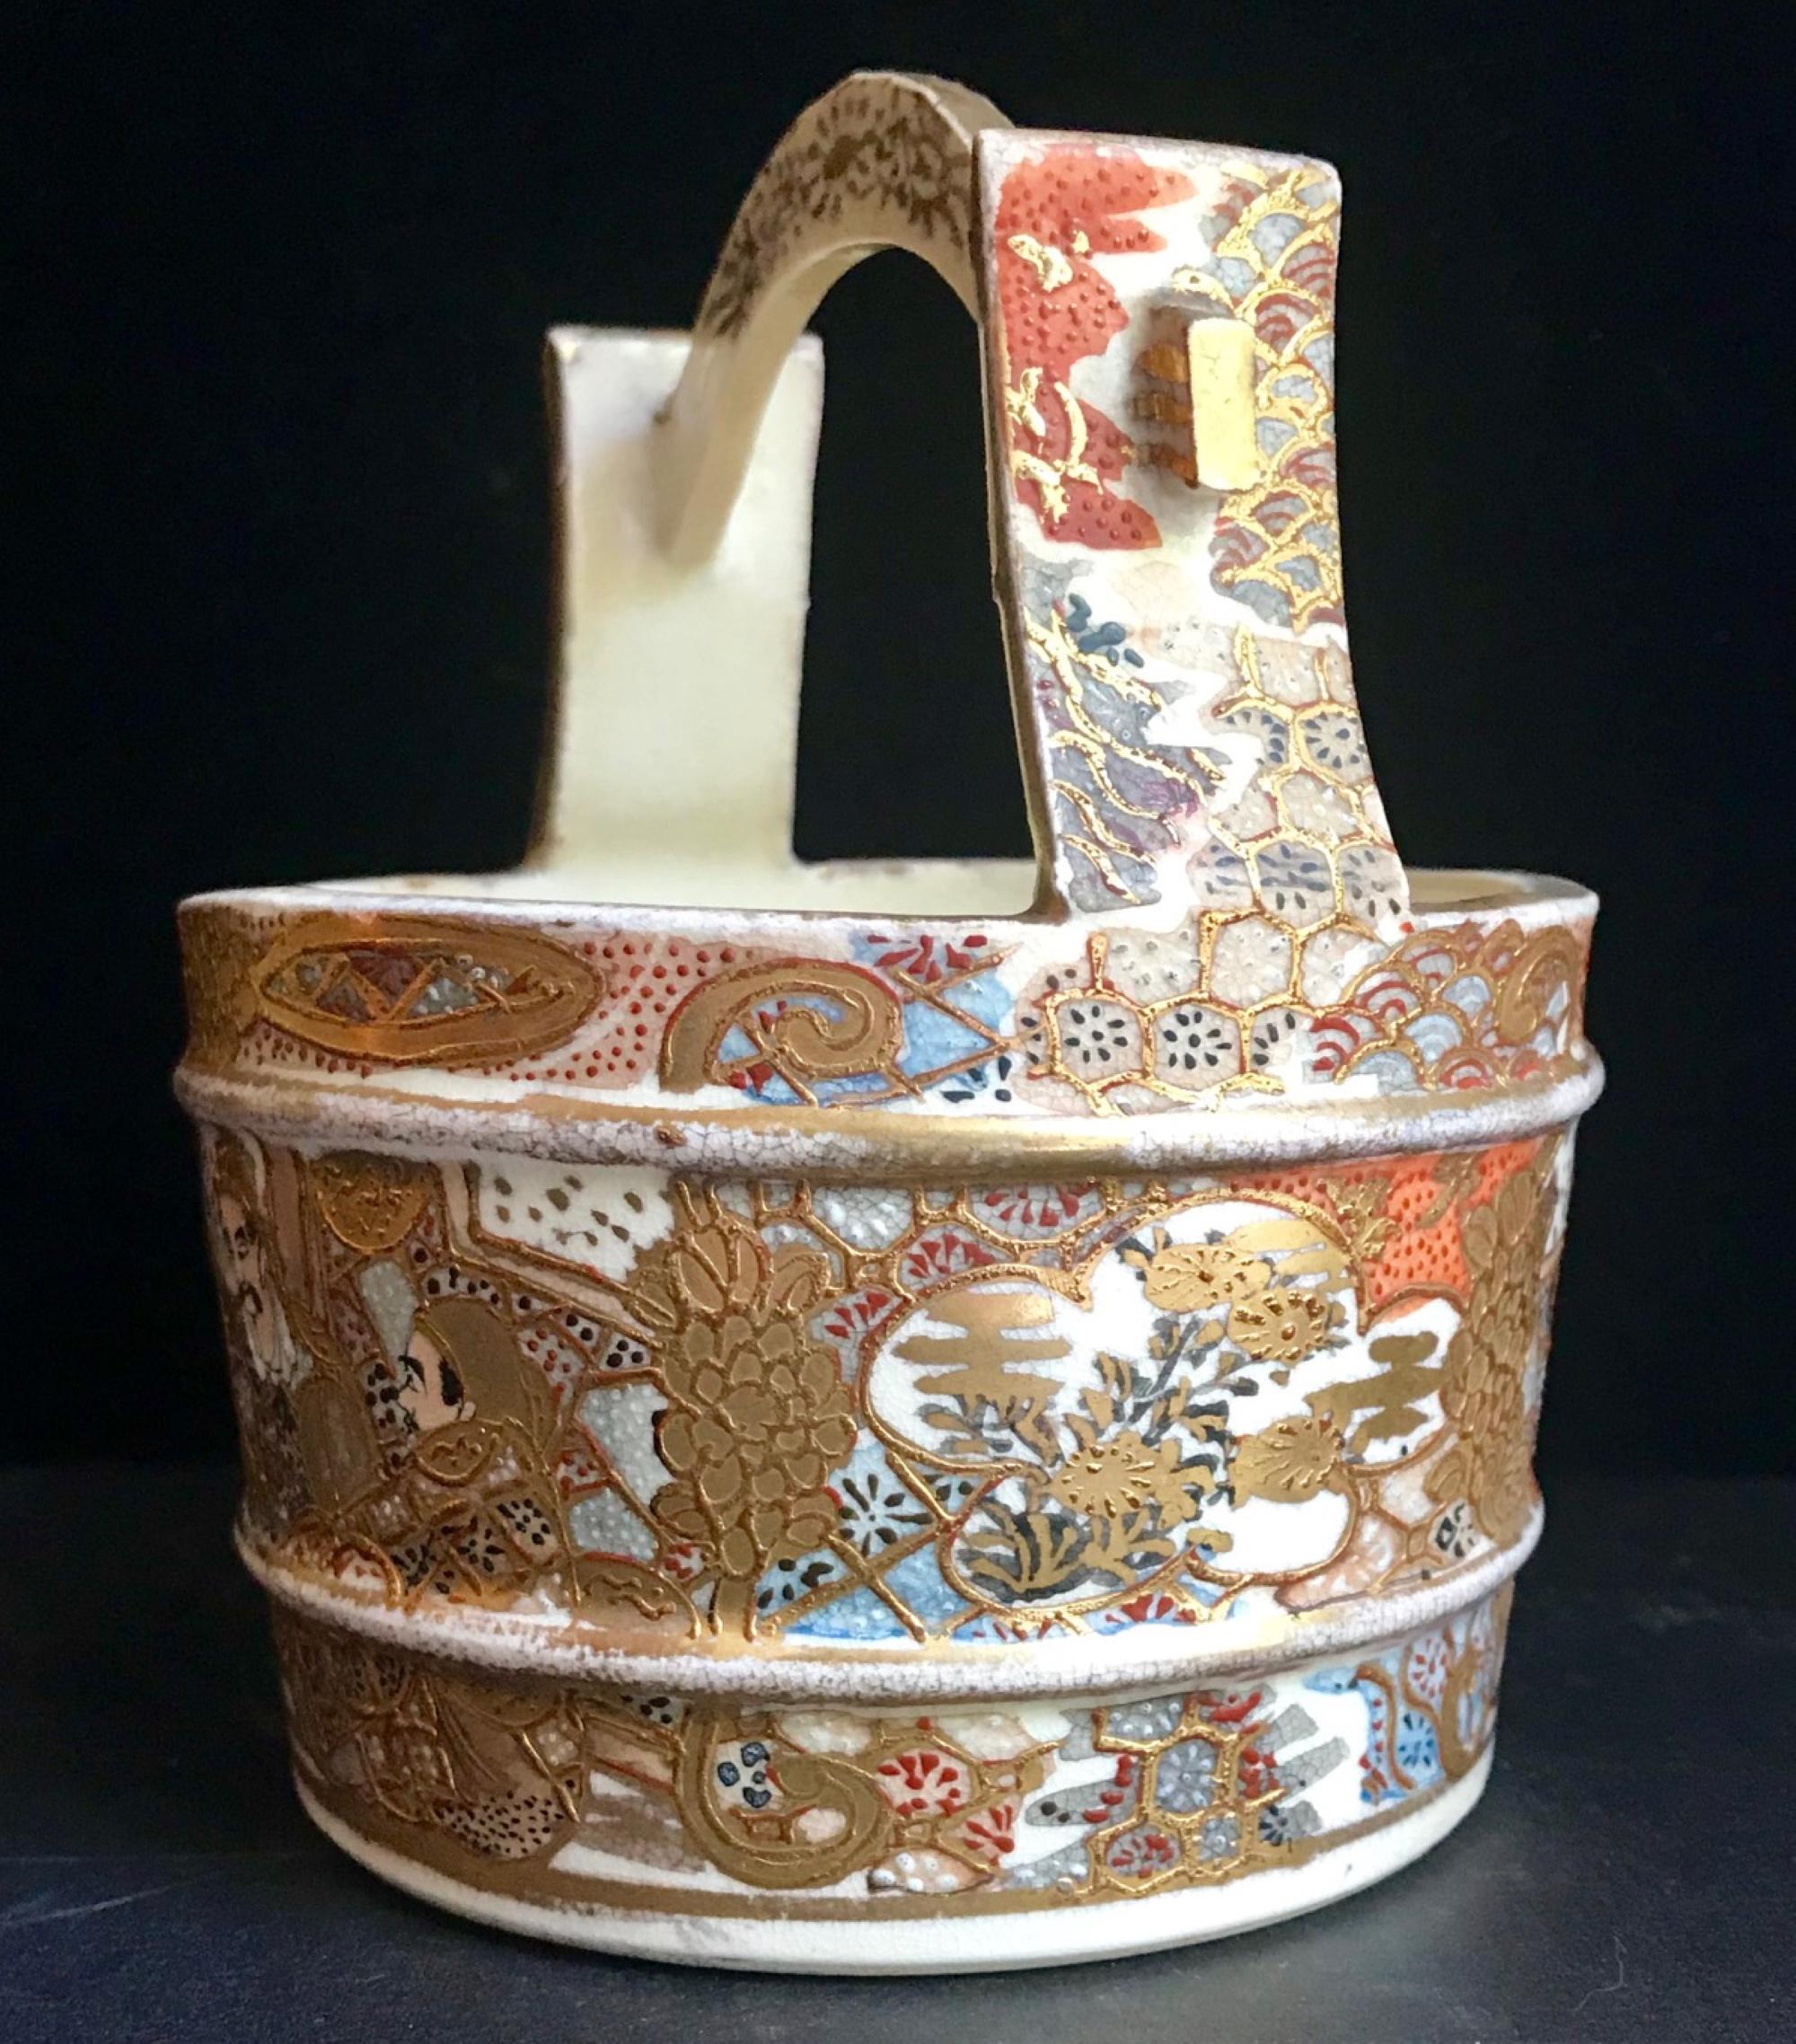 Hand-Painted 19th Century Japanese Satsuma Porcelain Water Well Bucket, Wishing Well Vase For Sale